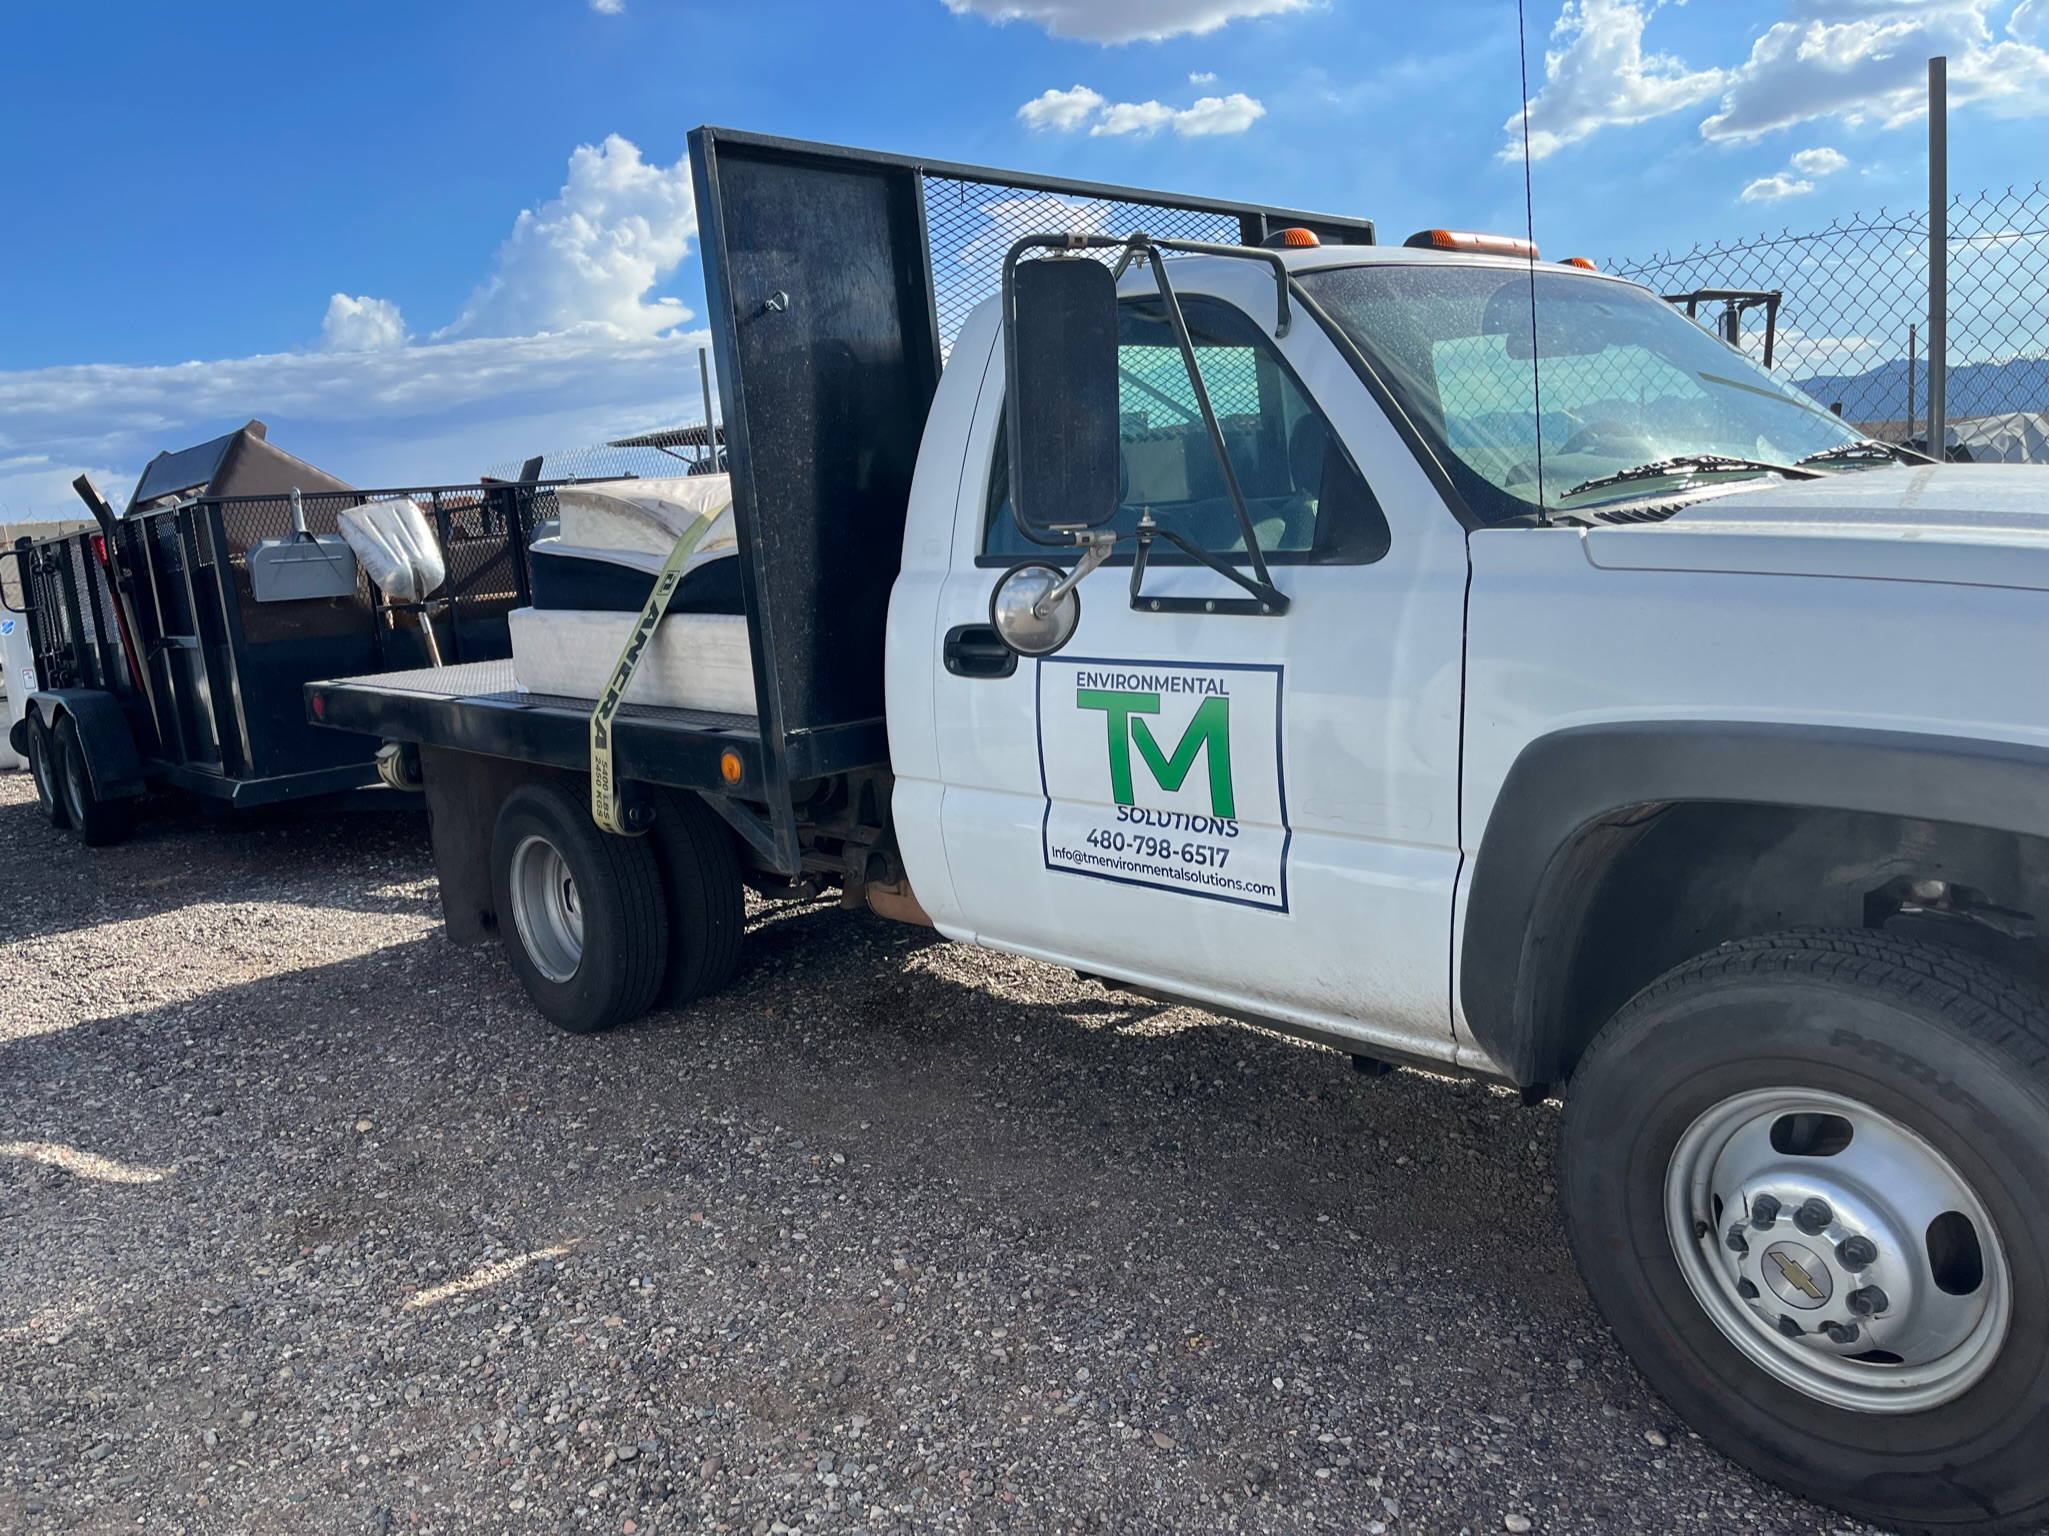 TM Junk Removal Truck and Trailer in Chandler